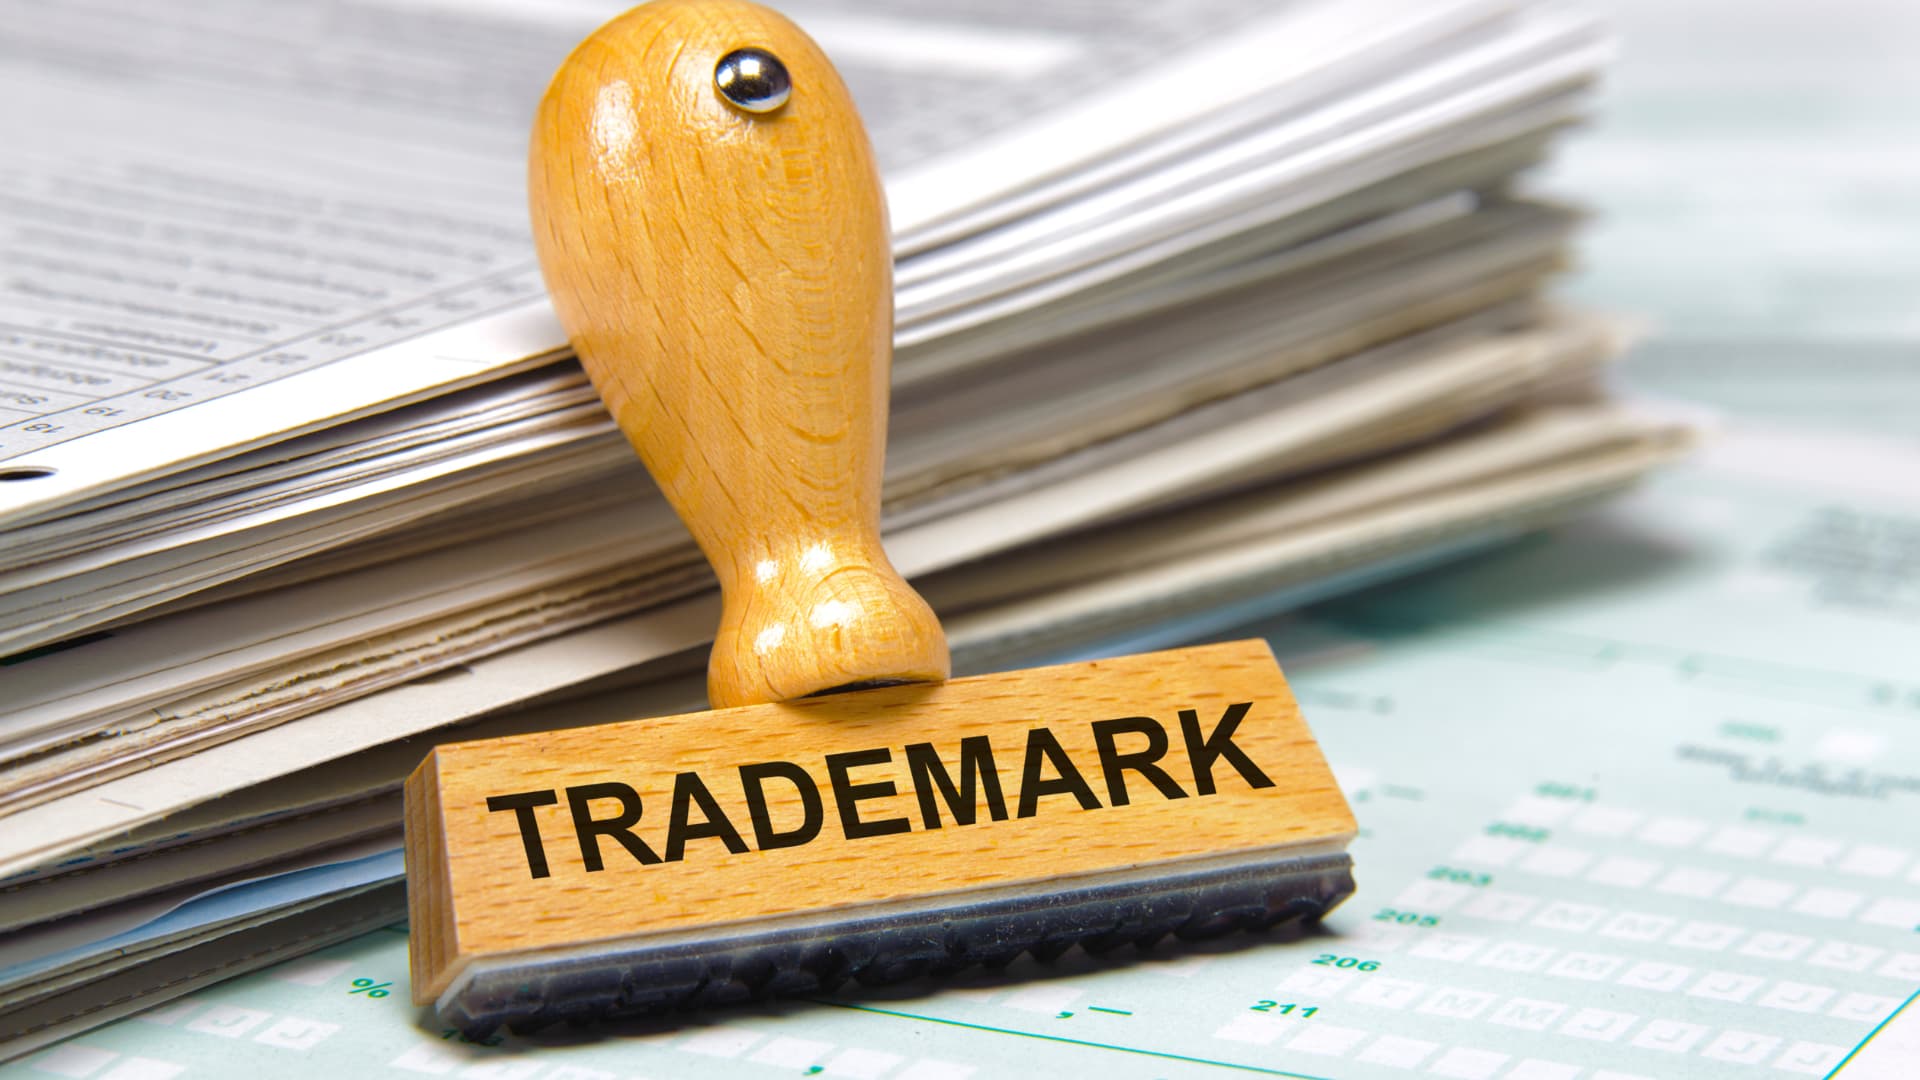 An image of a trademark stamp on top of a pile of documents.